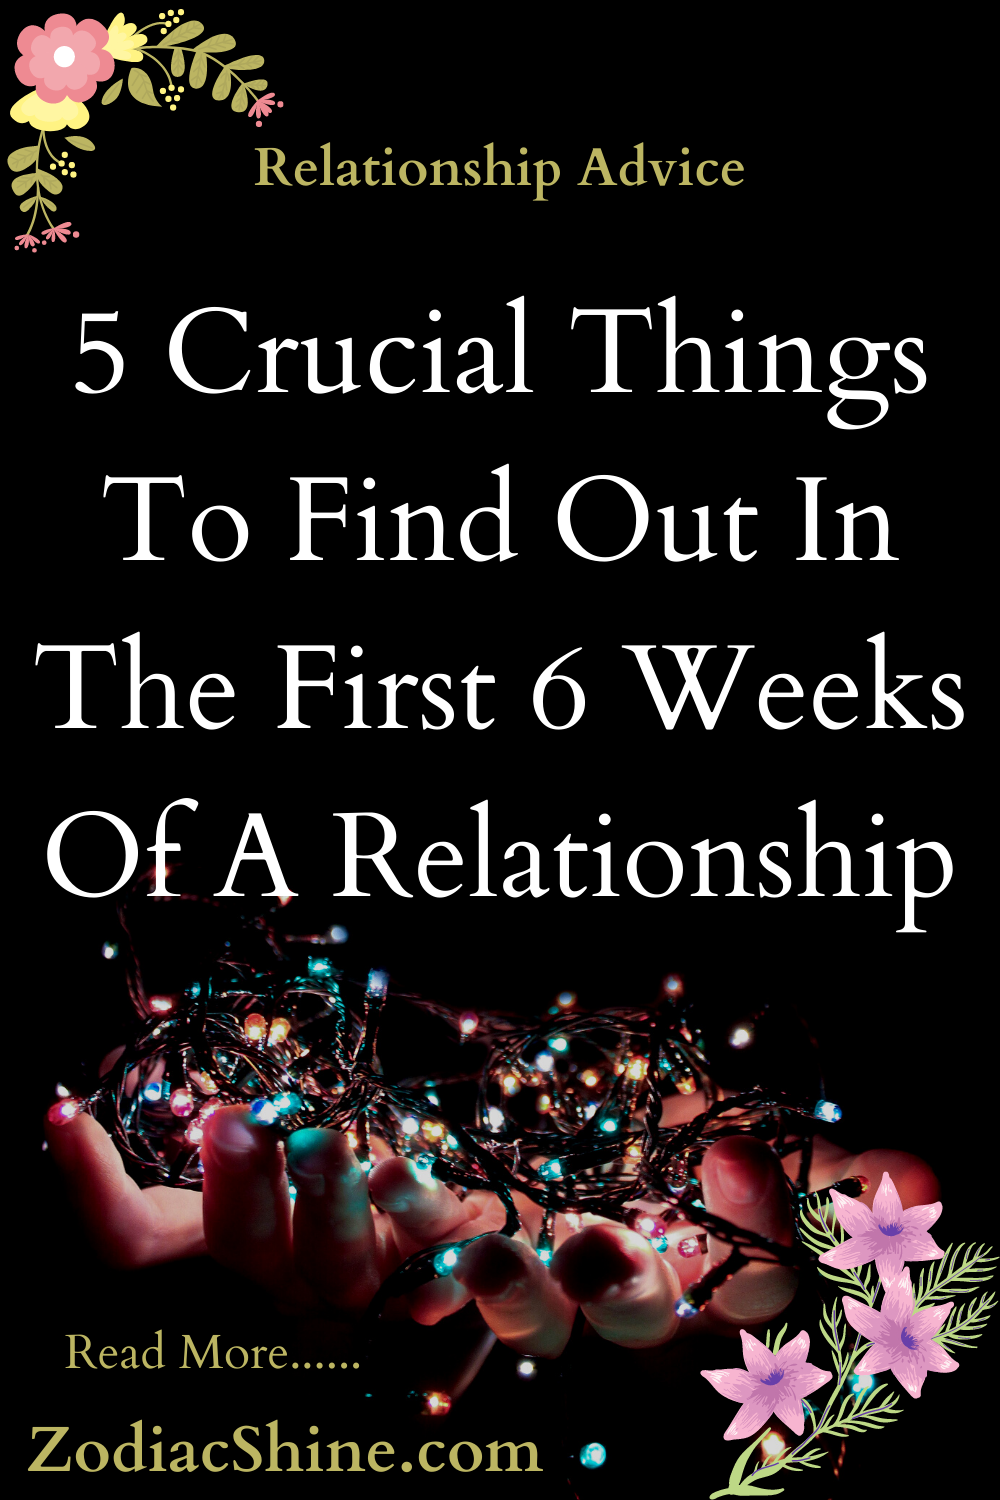 5 Crucial Things To Find Out In The First 6 Weeks Of A Relationship